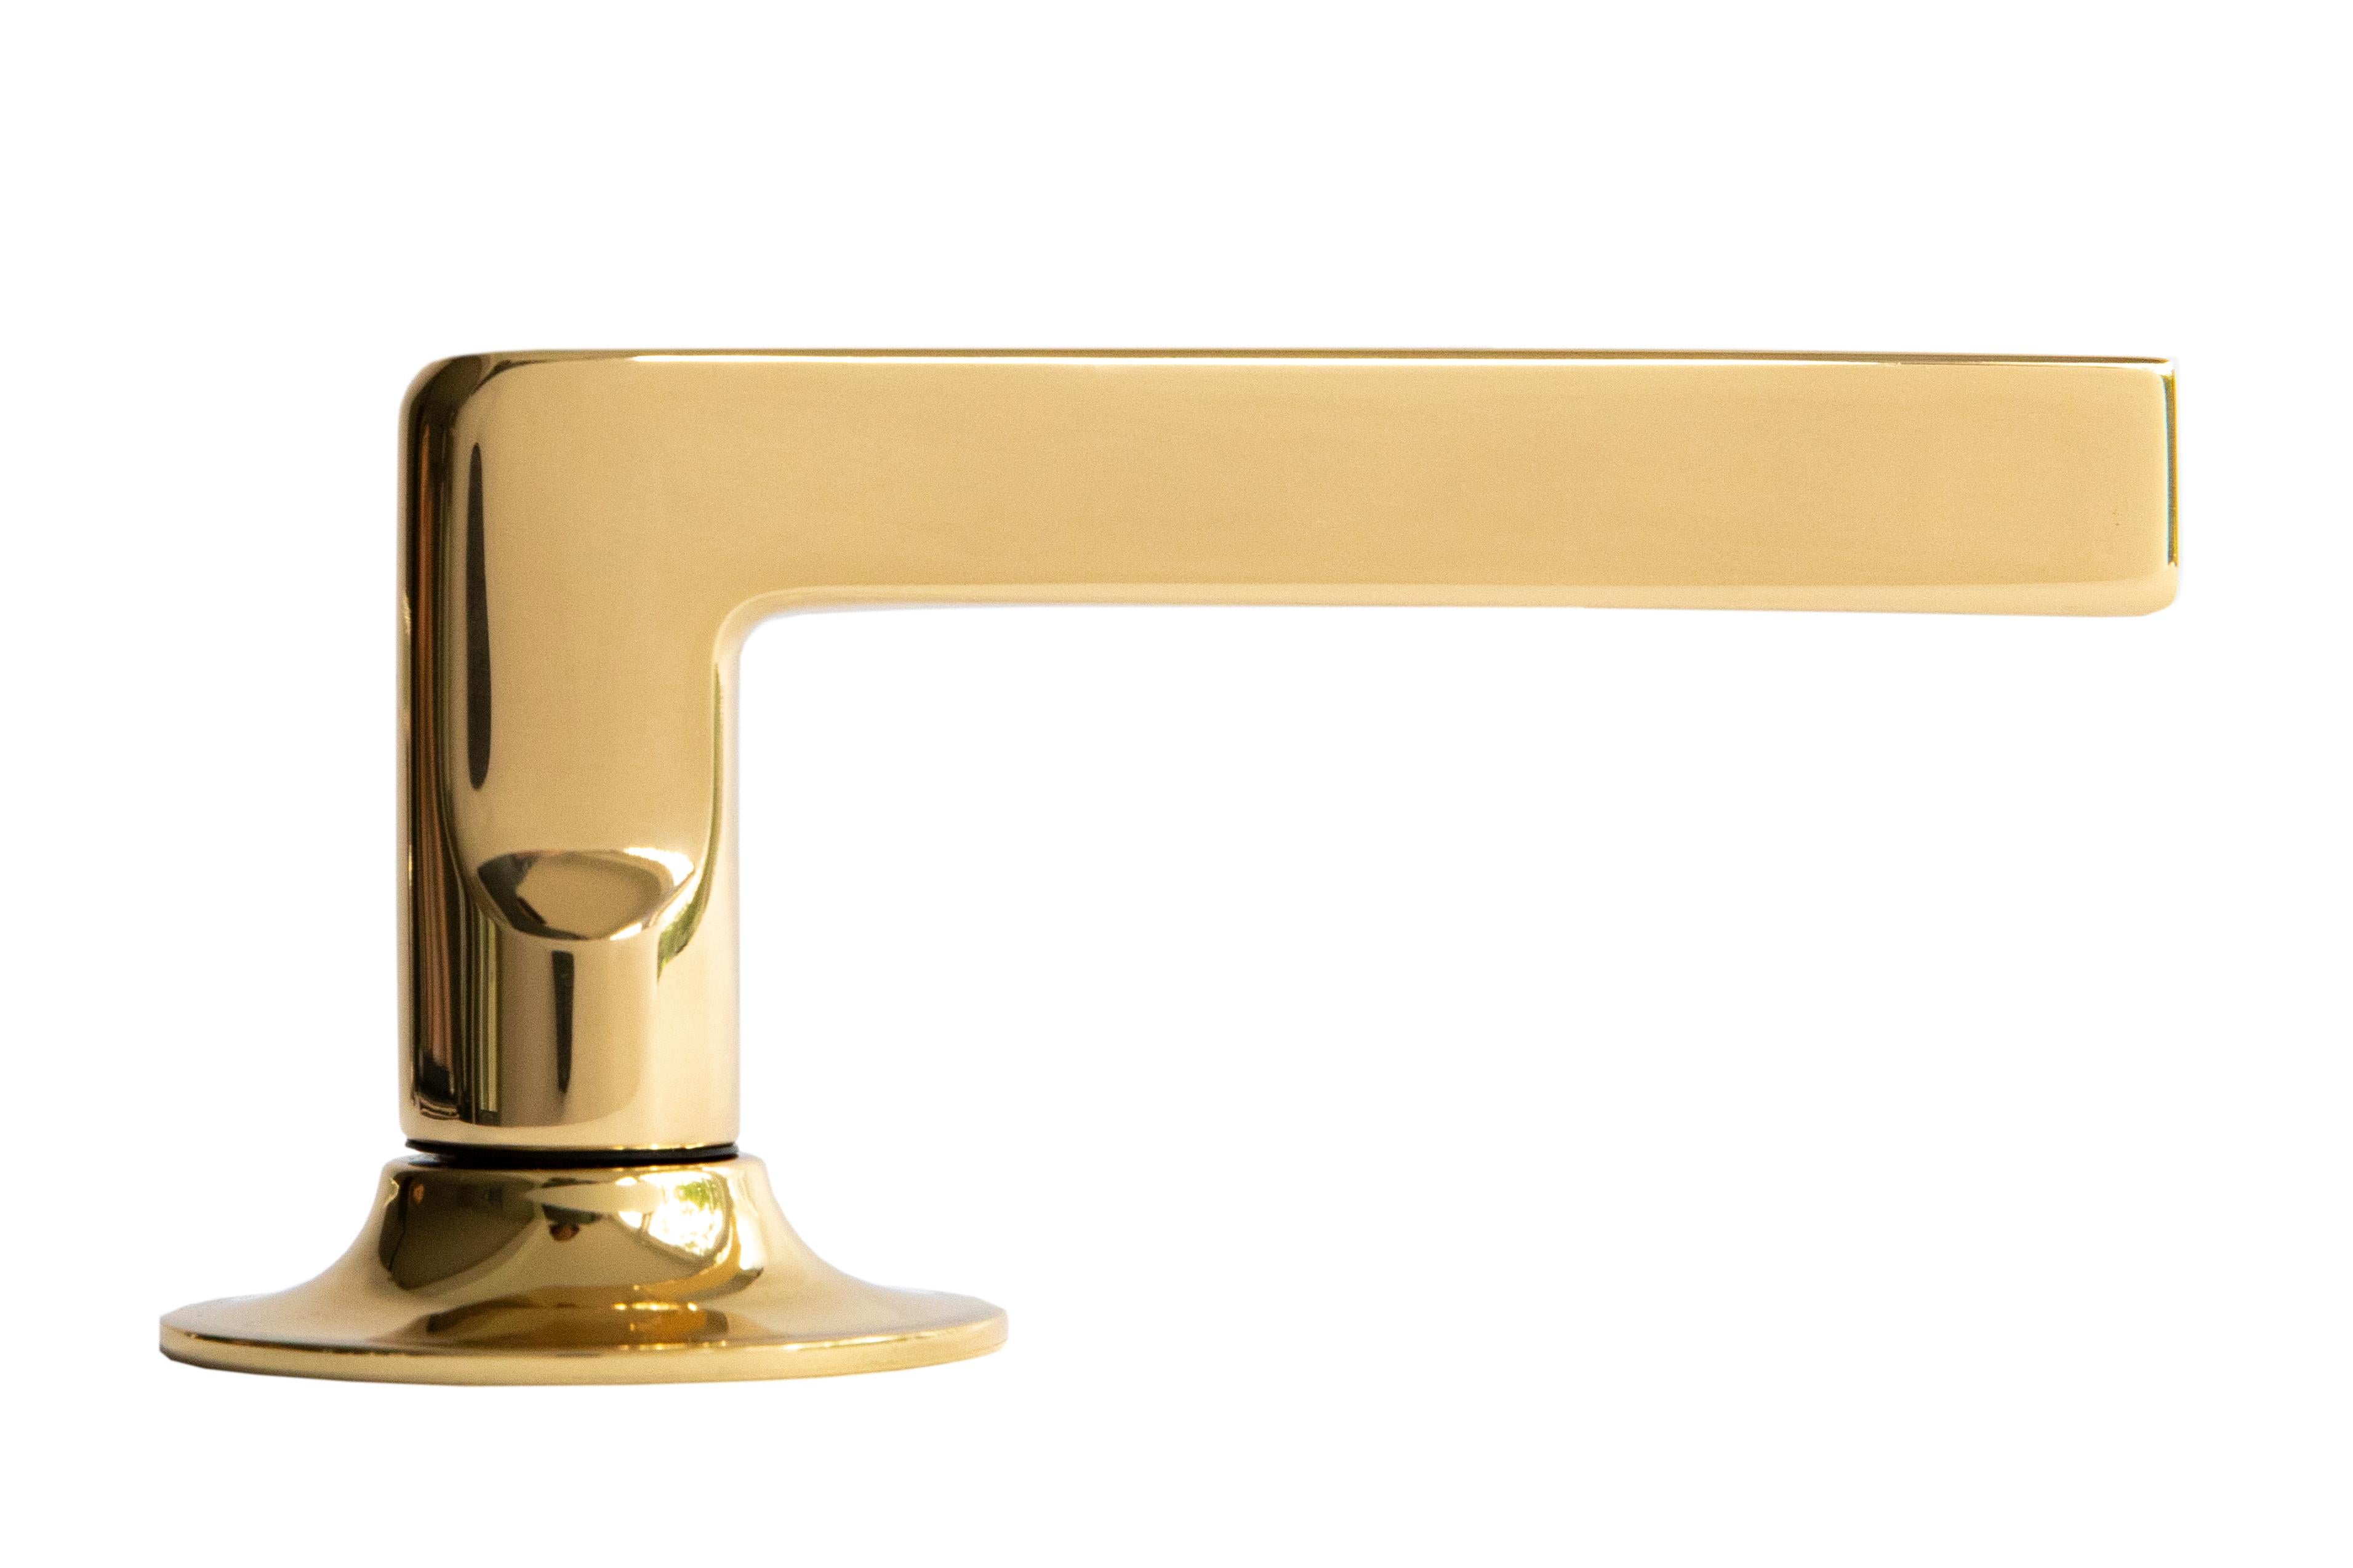 The Vica Lever features a streamlined lever and rosette. Available in unlacquered brass, burnished brass, burnished nickel (oil-rubbed bronze available upon request).
 
Lever and rosette pairs include 8 mm straight spindle (please confirm size